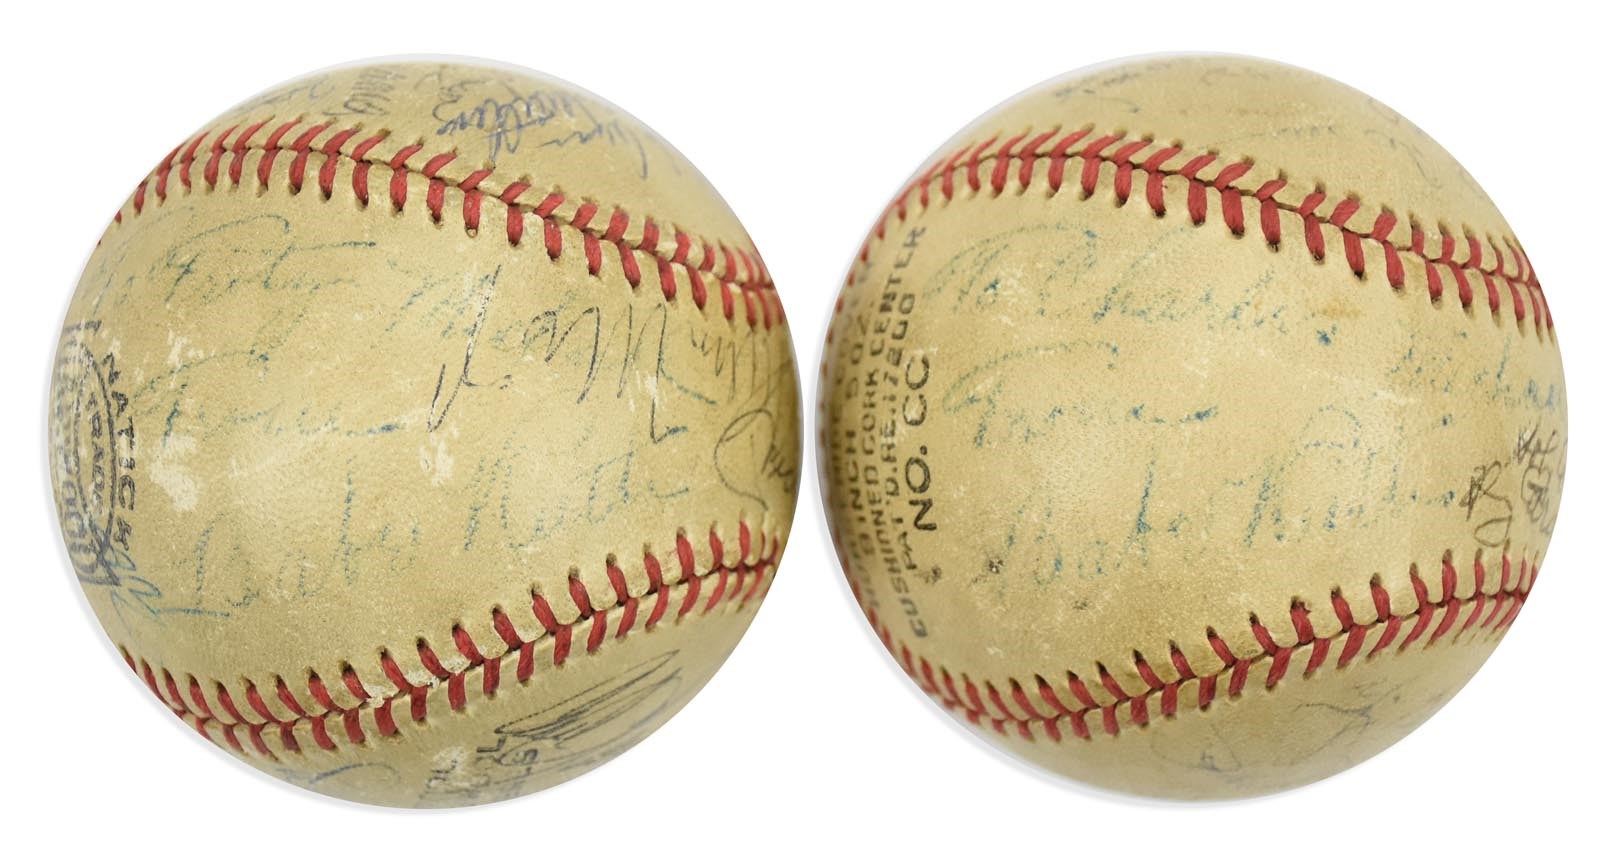 Pair of Fantastic Babe Ruth & HOFers Signed Baseballs from the Same Family (PSA)